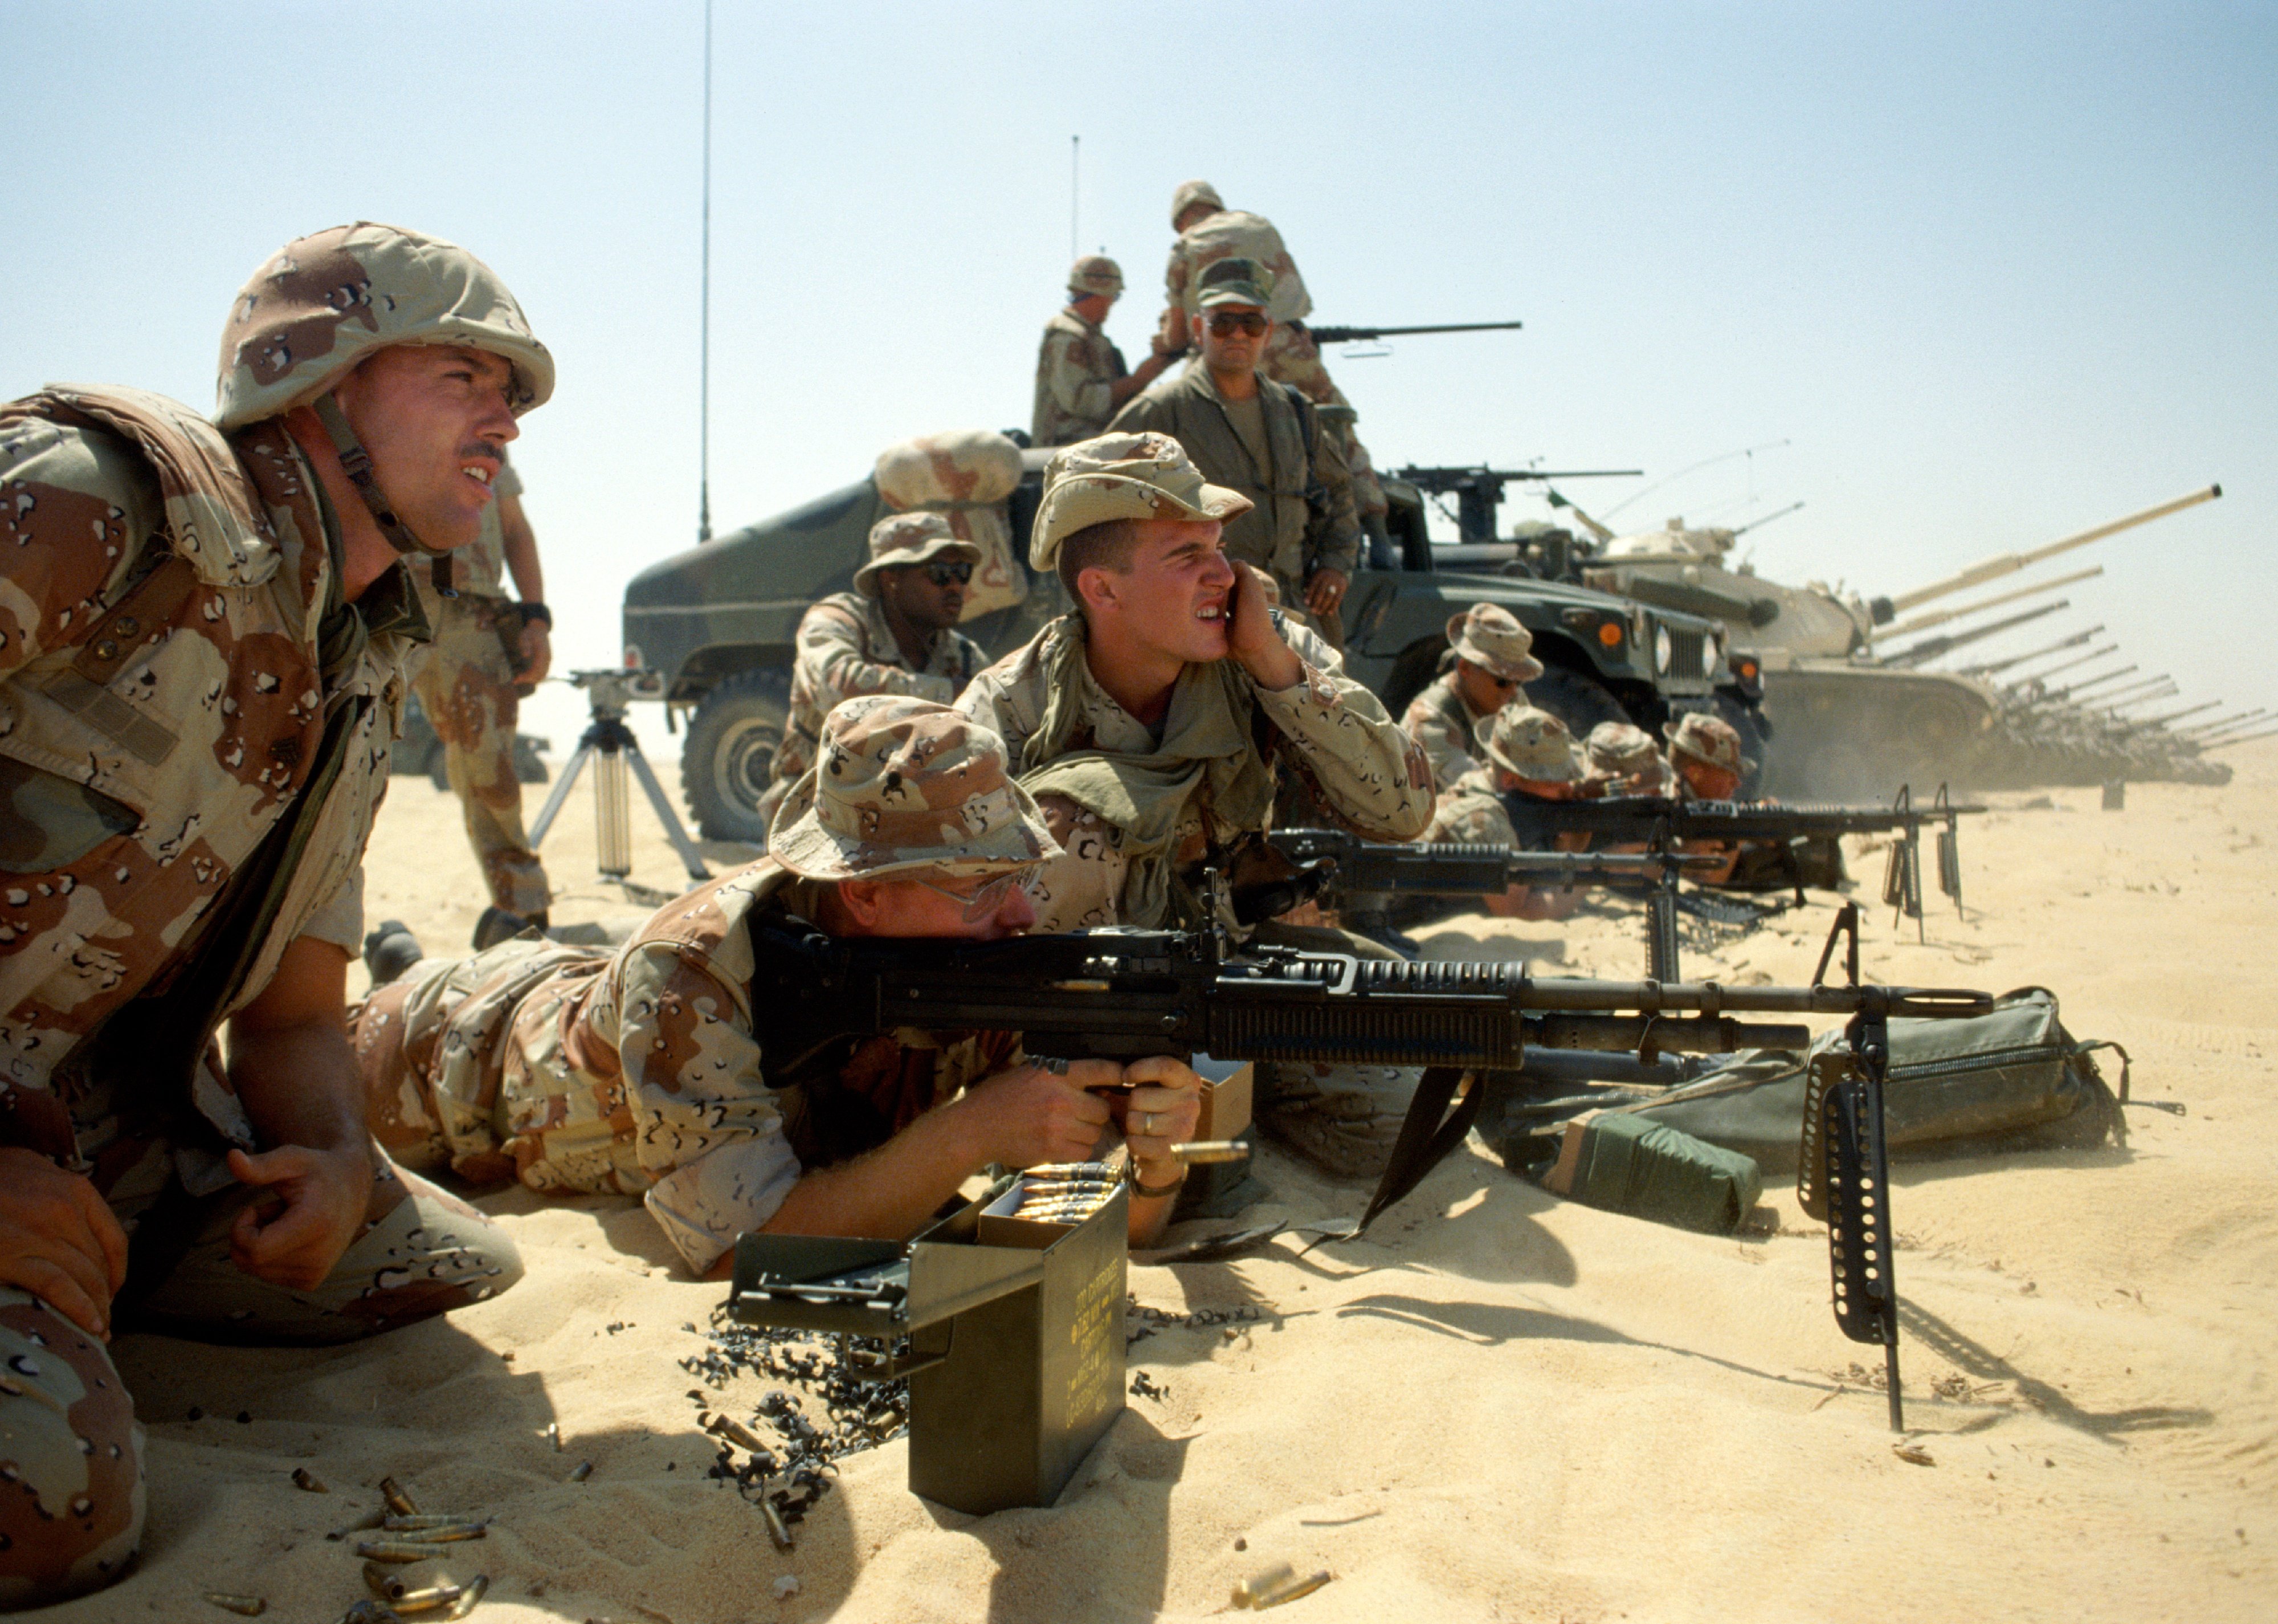 US forces carry out a live firing exercise in the Saudi desert.